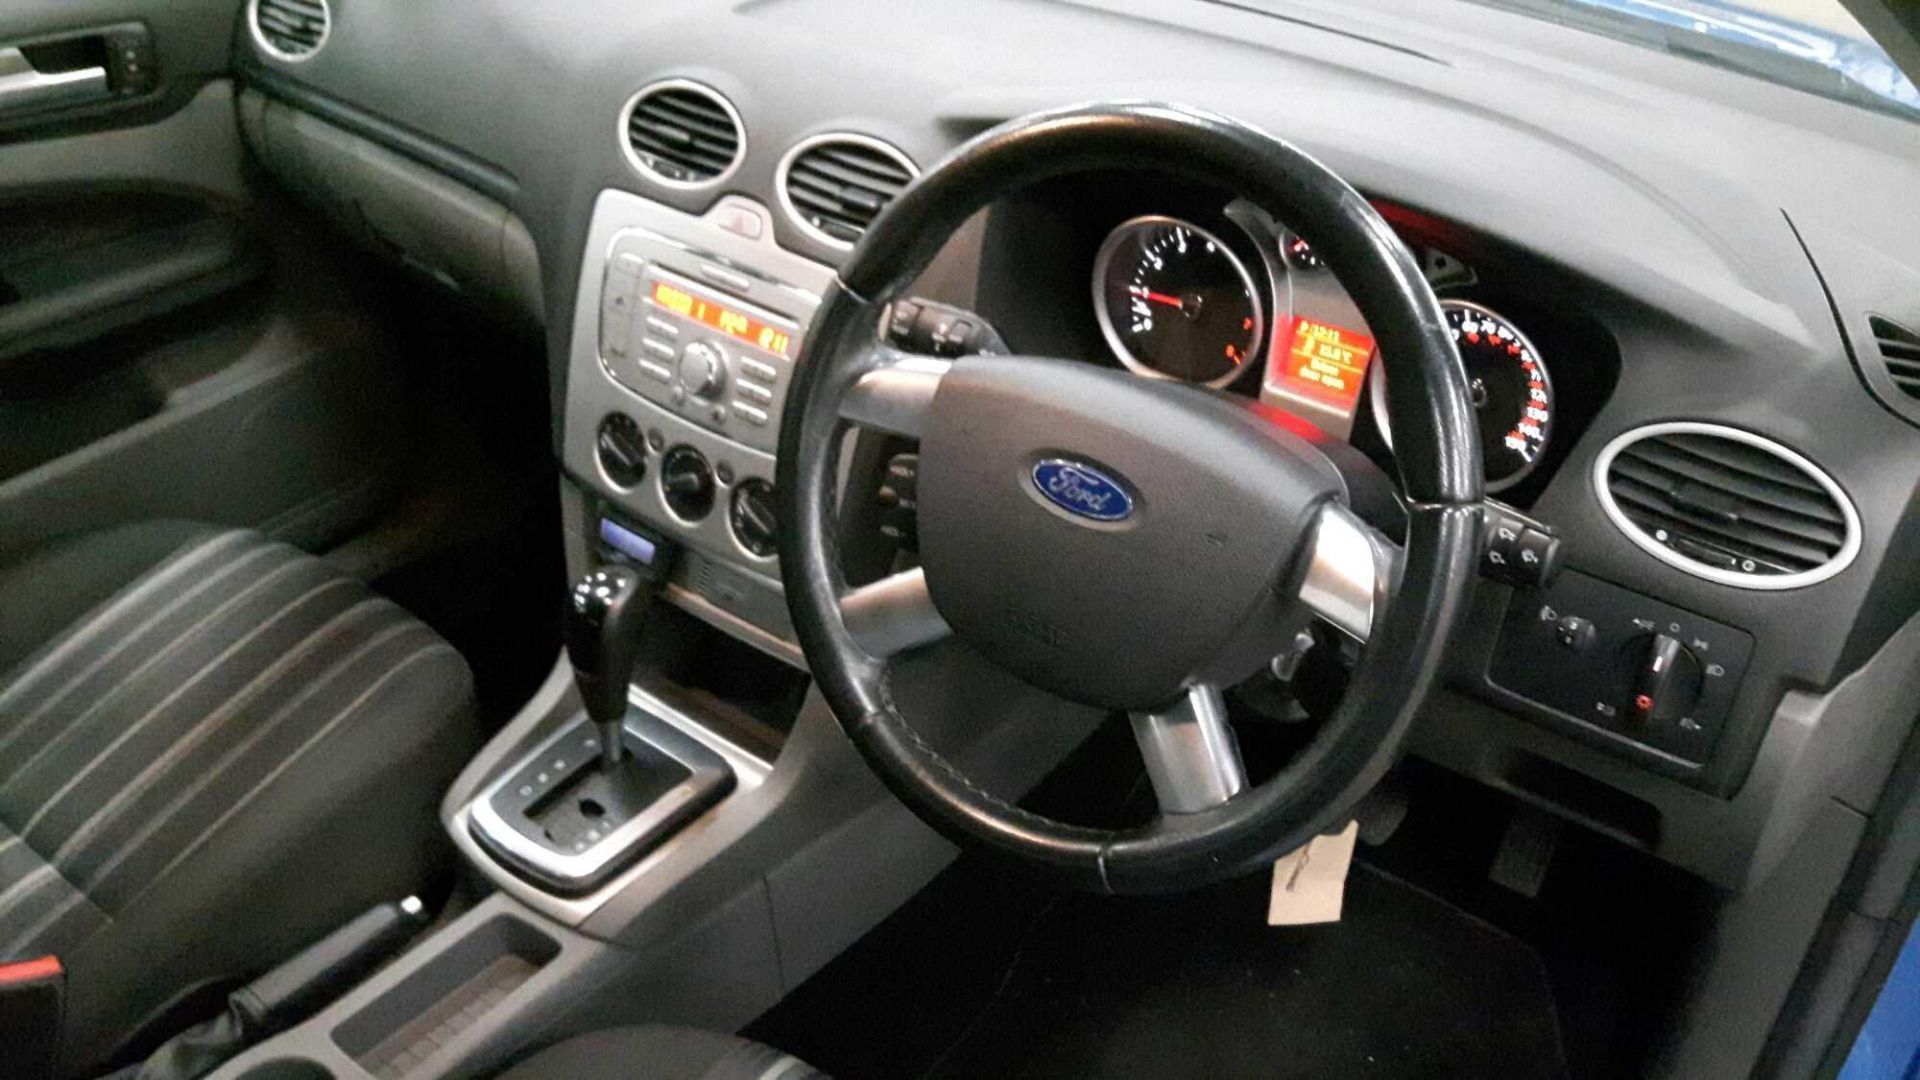 Ford Focus Style 100 Auto - 1596cc 5 Door - Image 5 of 6